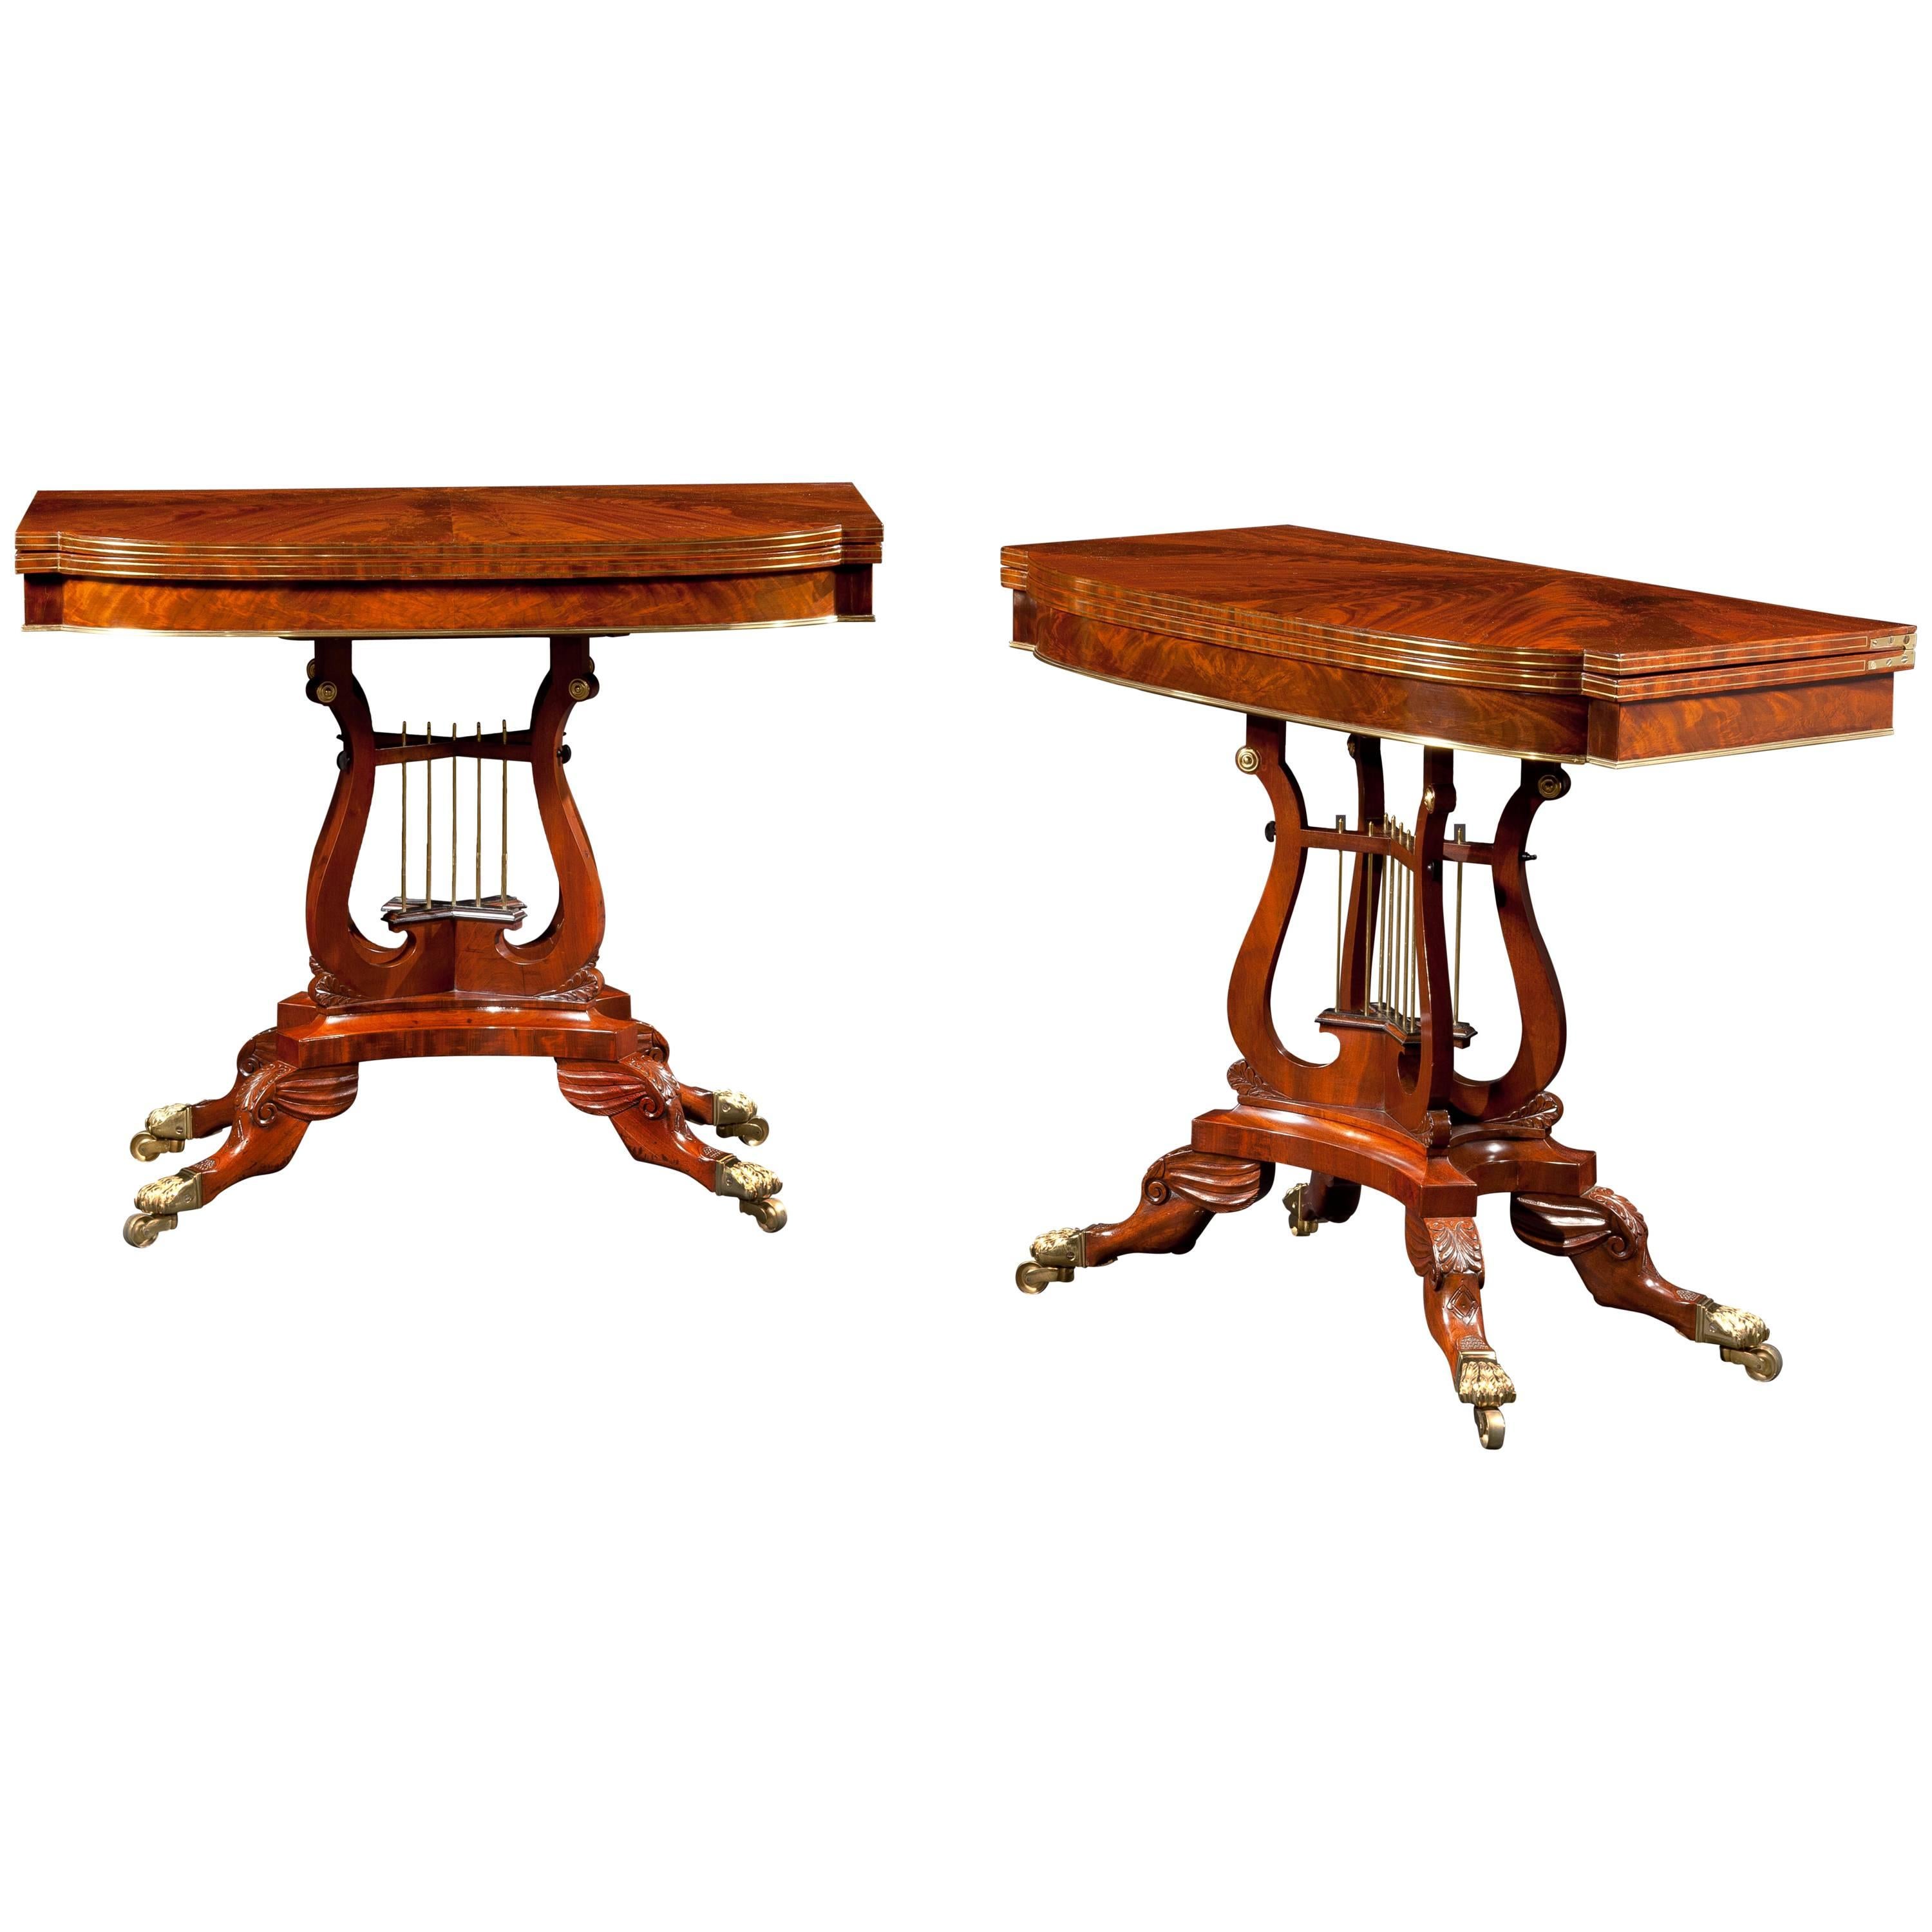 Pair of Brass-Mounted and Inlaid Games Tables